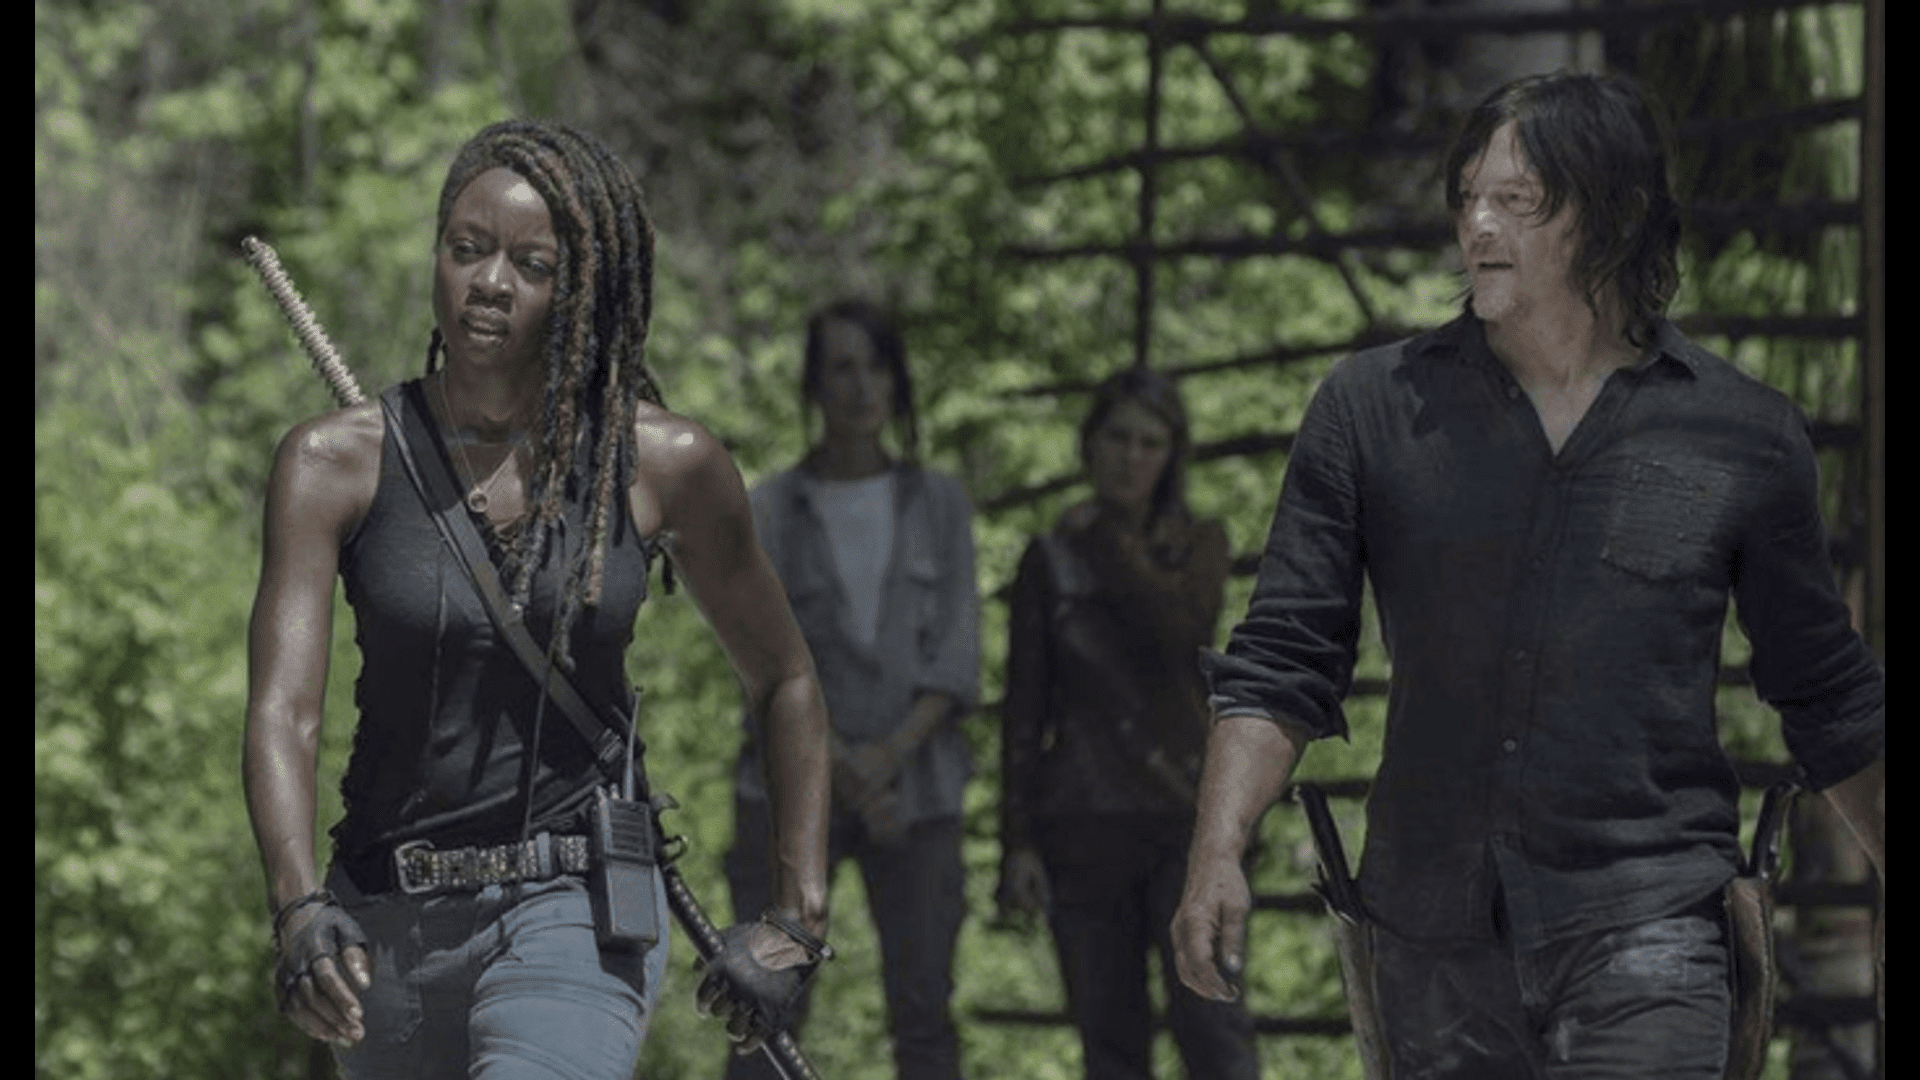 the-walking-dead-has-finished-shooting-the-end-of-an-era-in-television